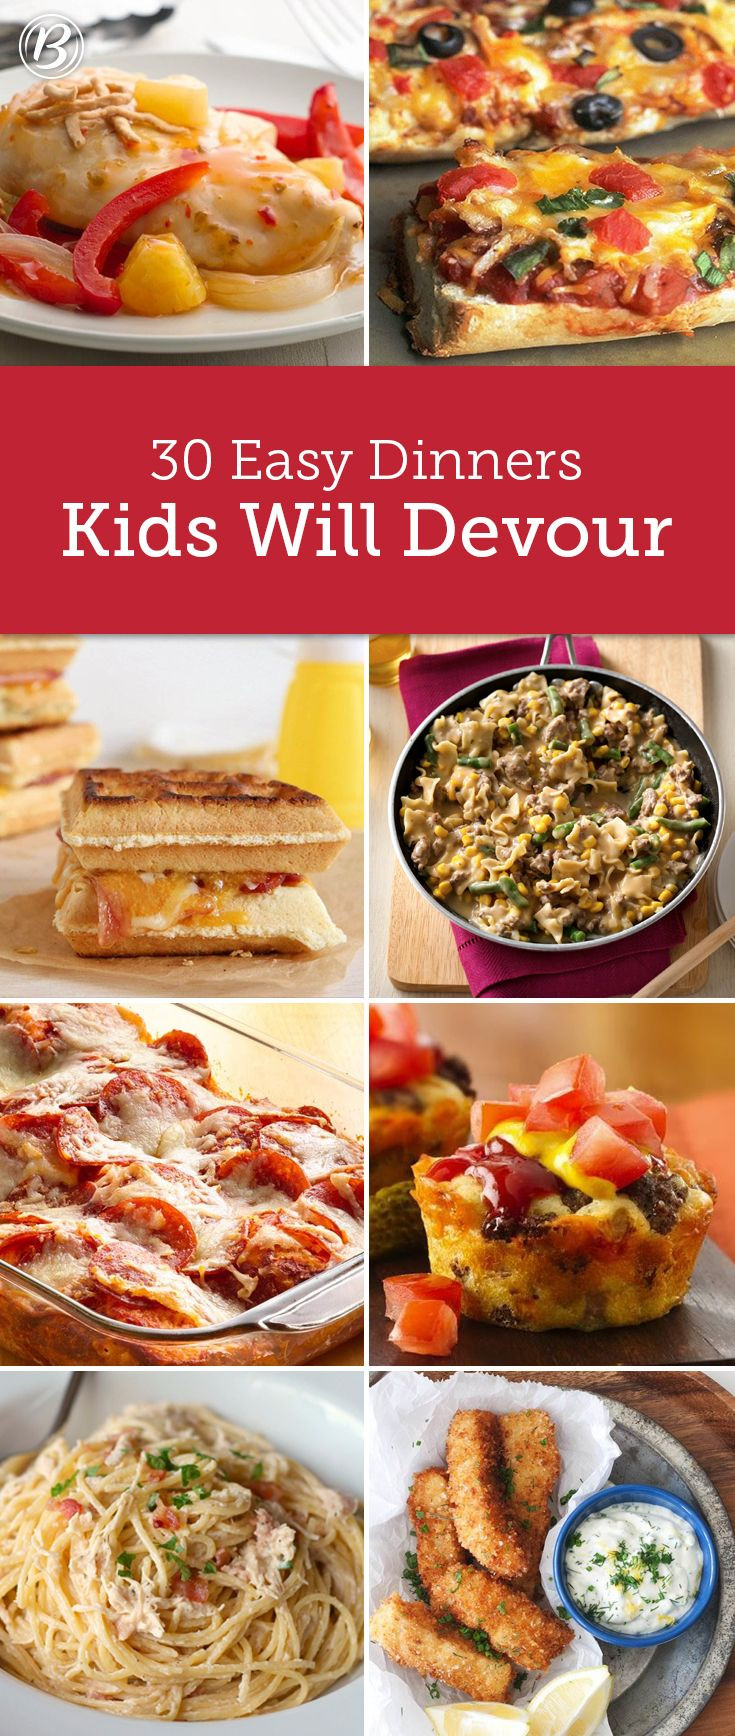 Easy Healthy Dinner Recipes Kid Friendly
 Kids’ Most Requested Dinners Family Dinners